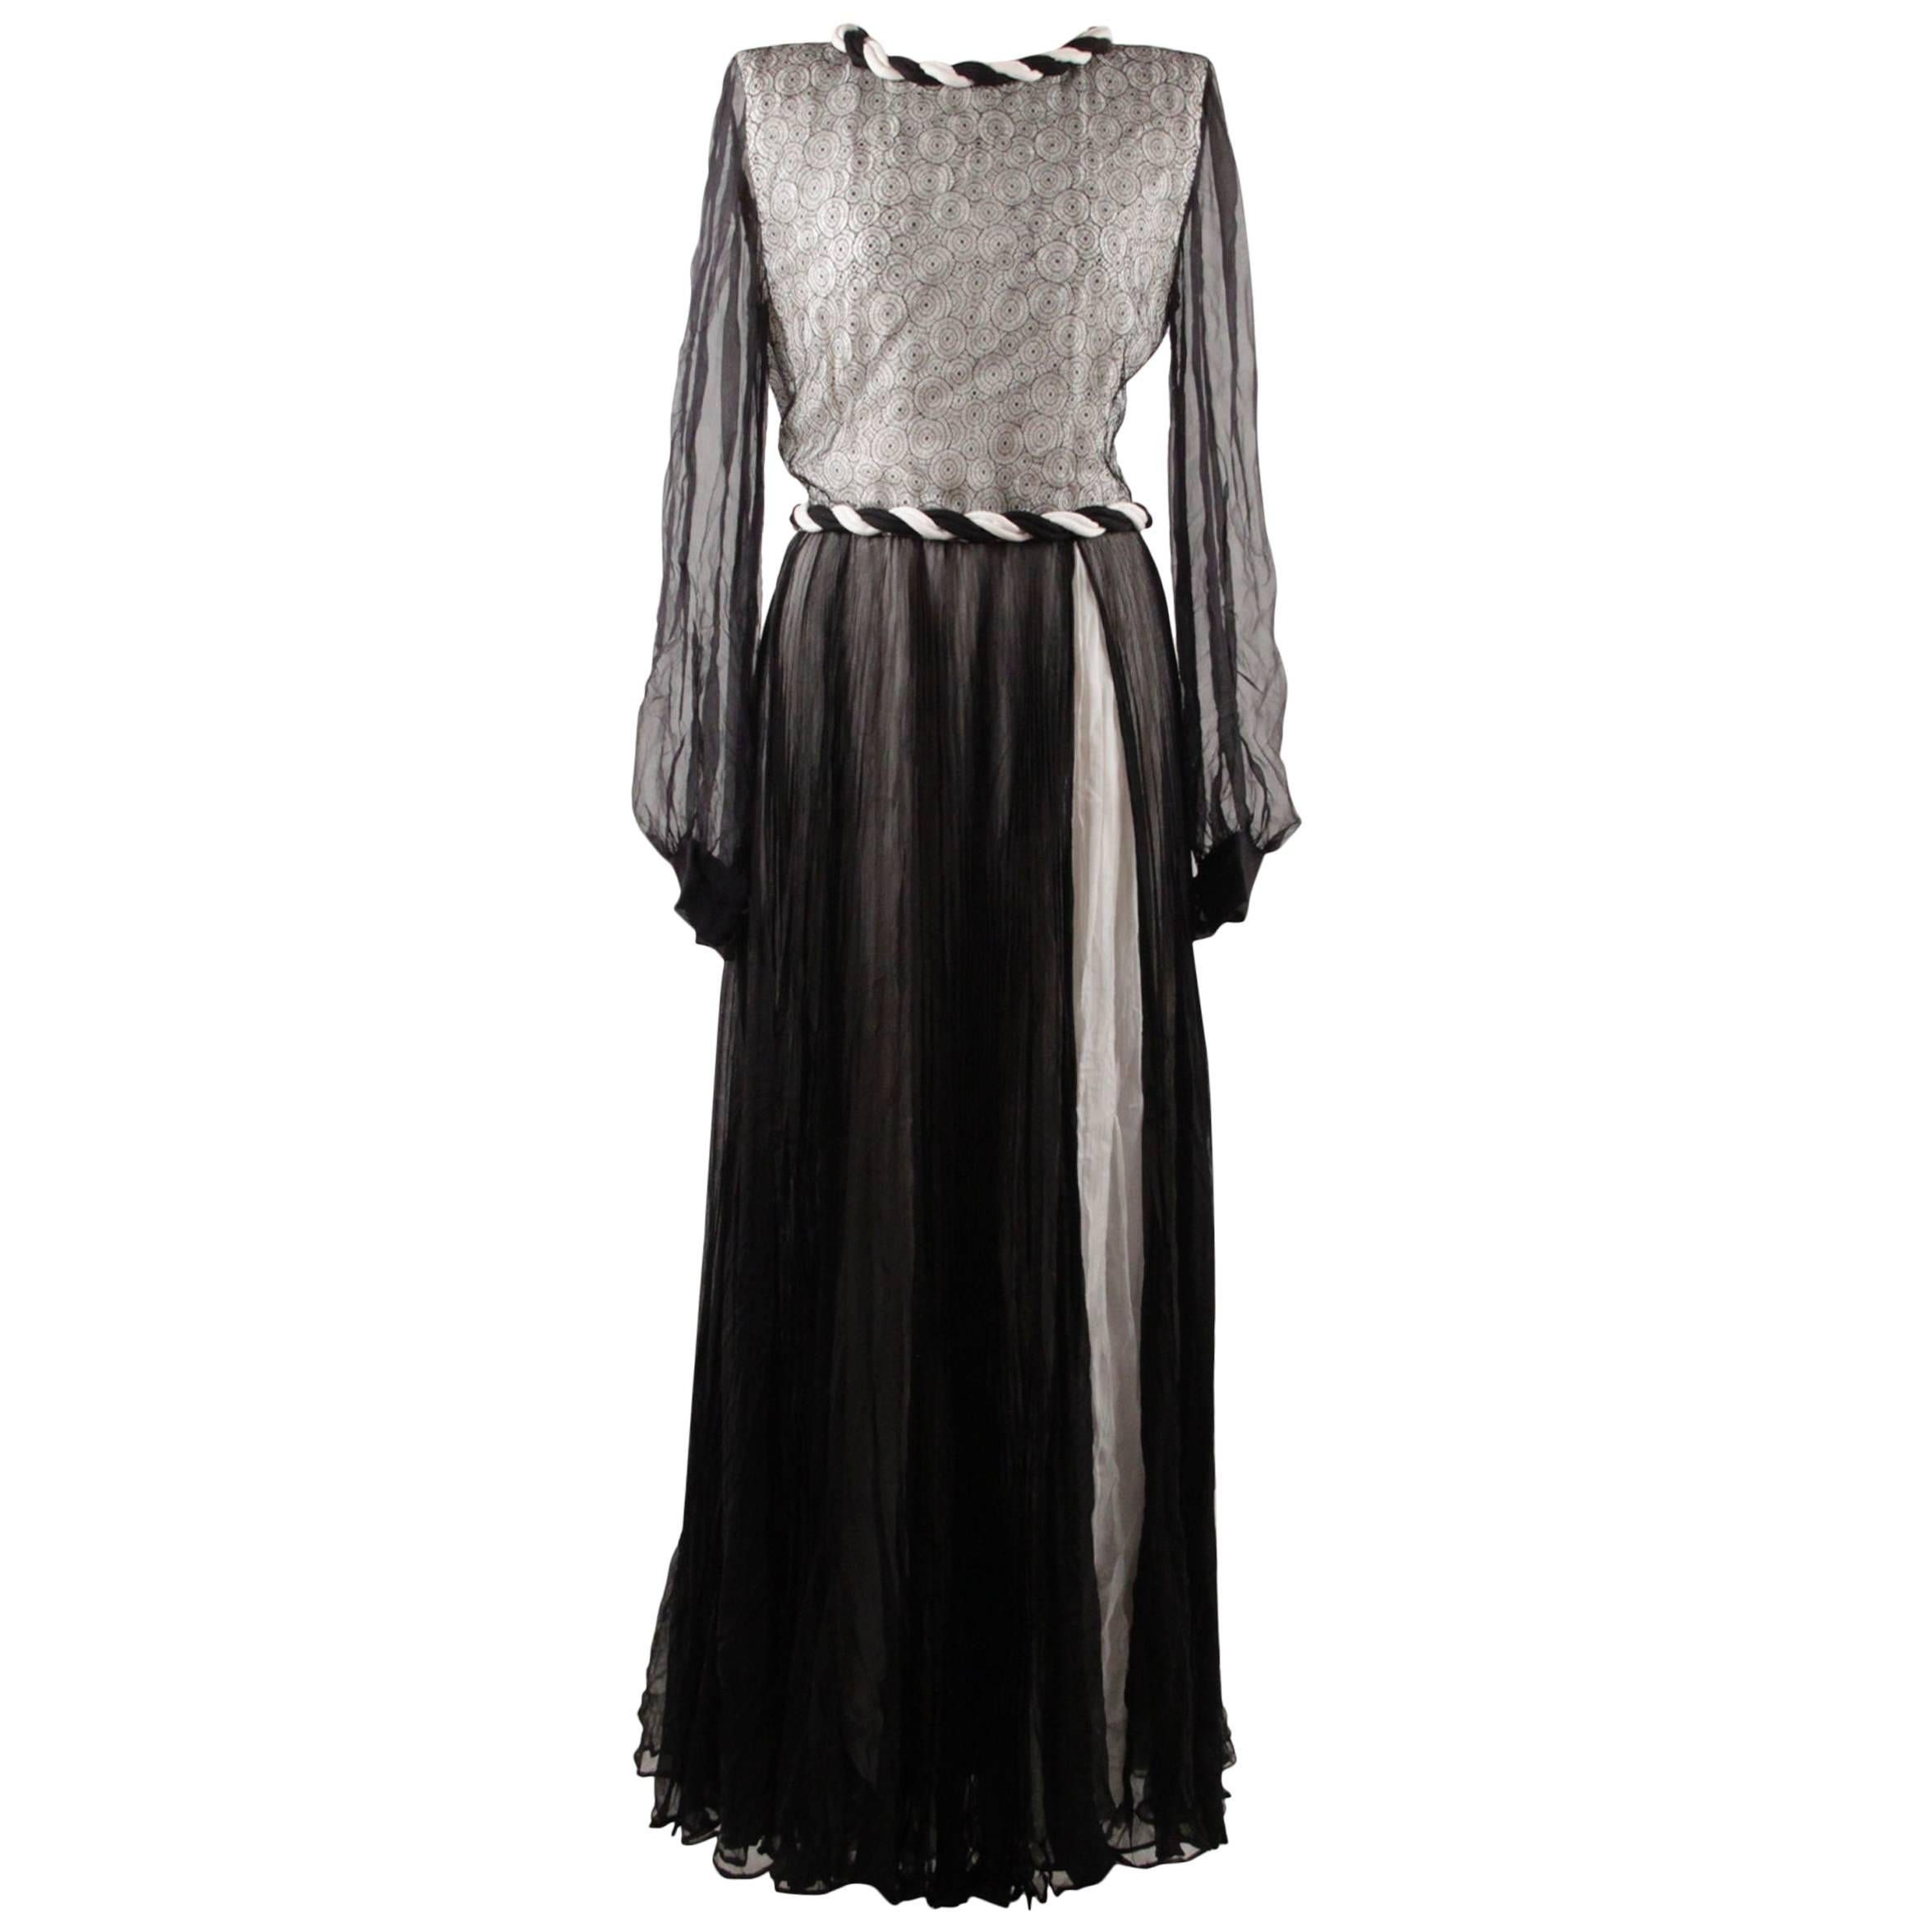 ANDRE LAUG Vintage Black & White GOWN Long Sleeve EVENING DRESS